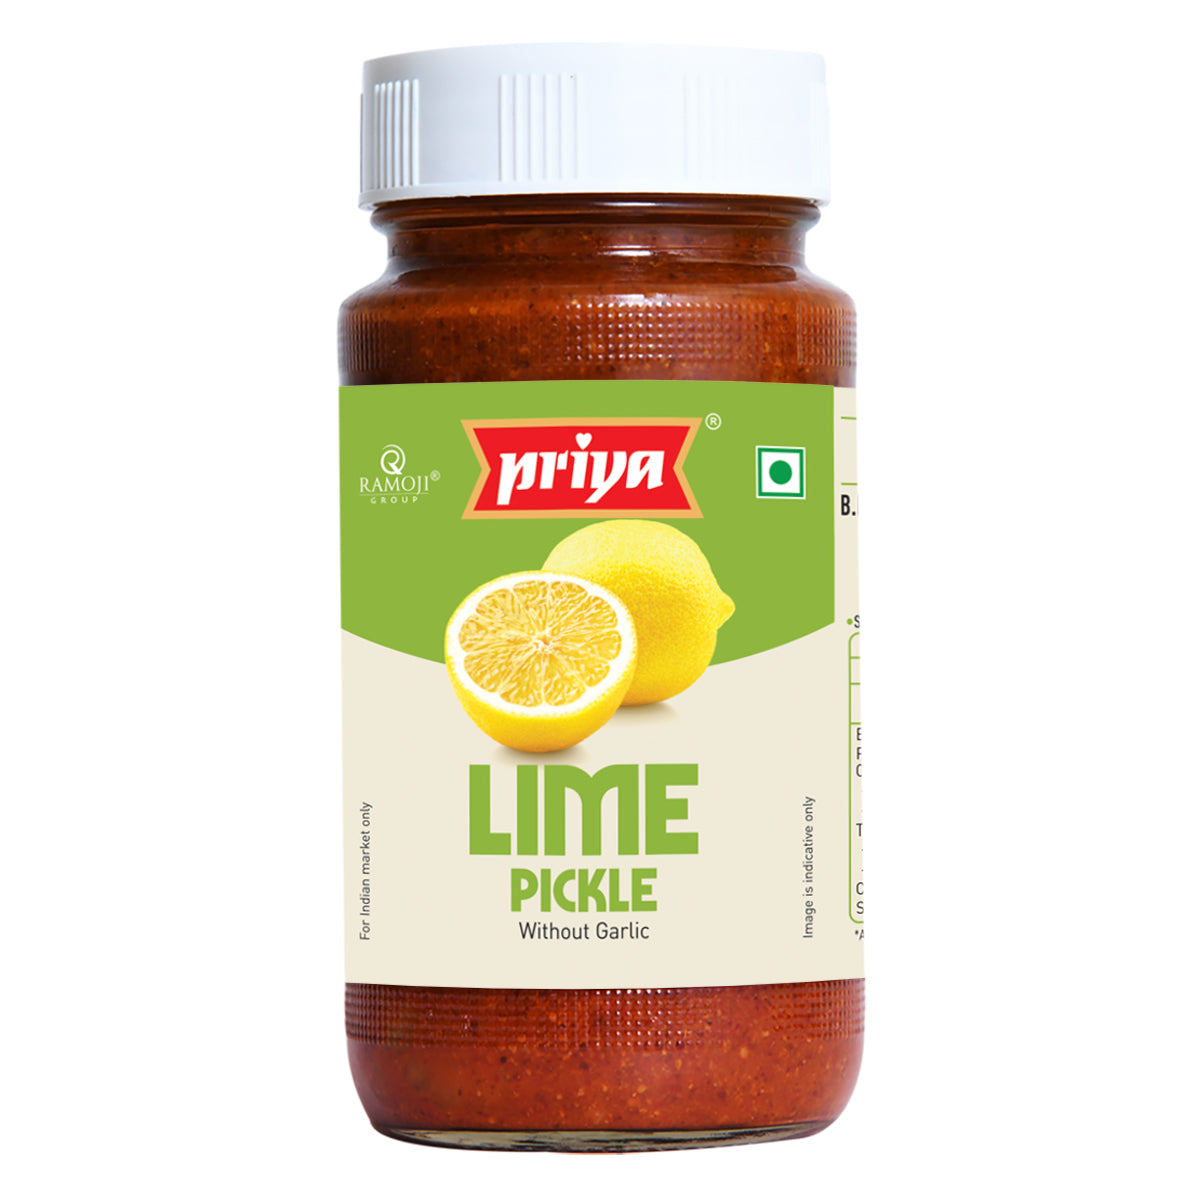 lime and pickle